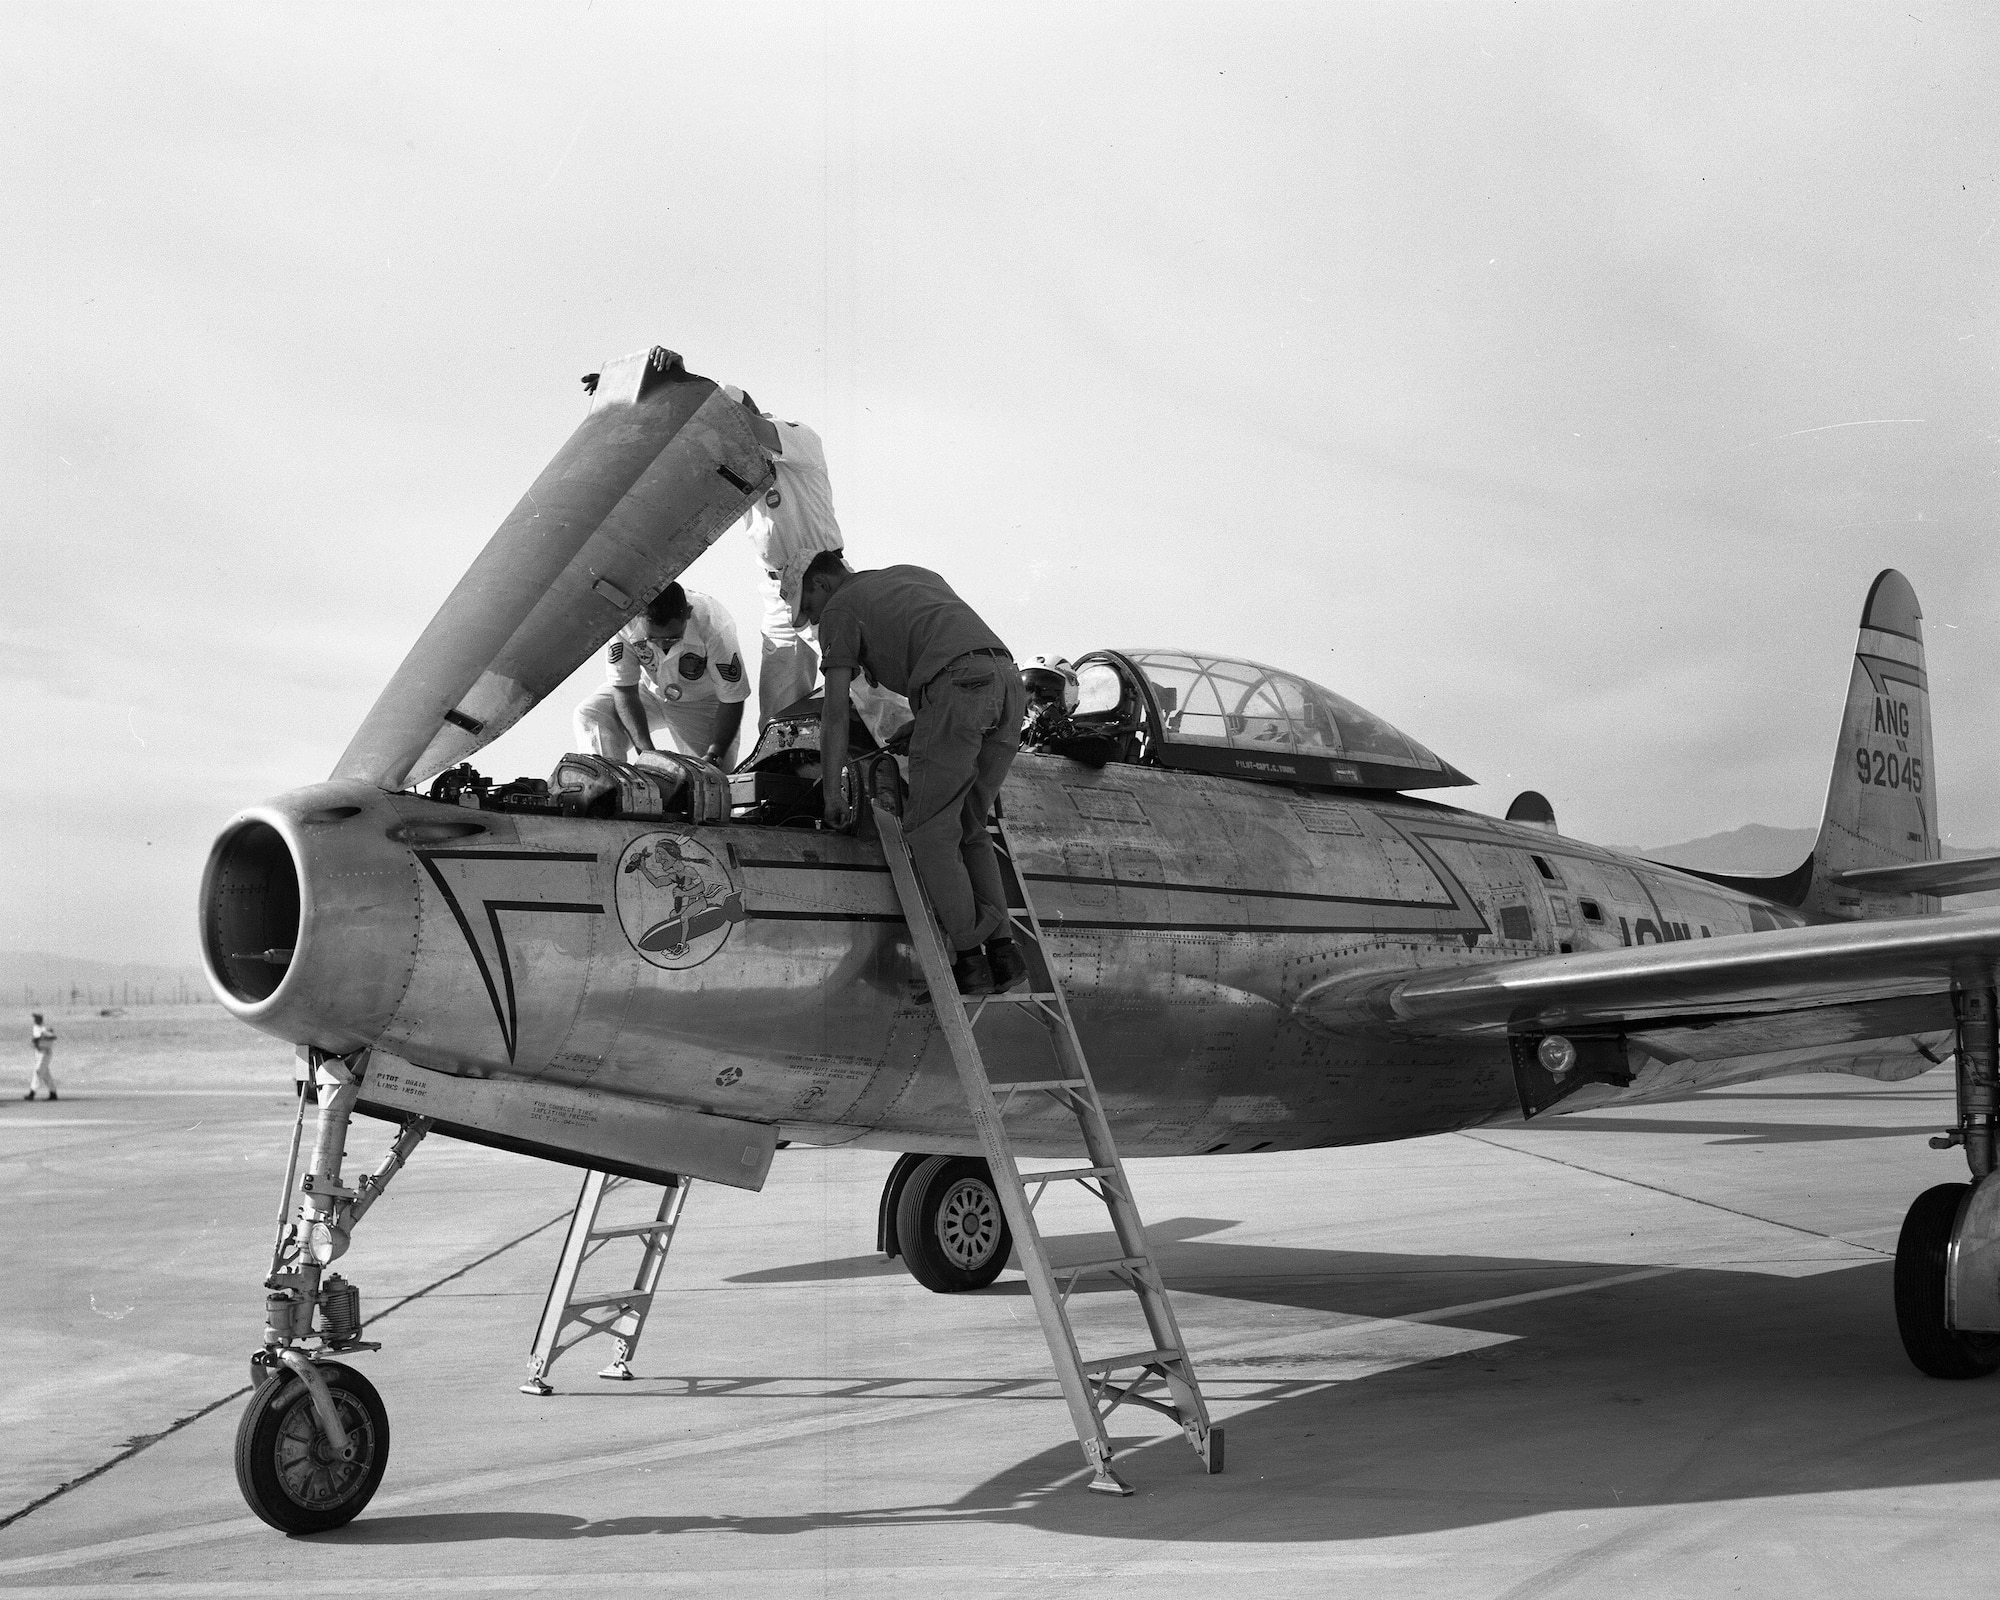 Ground crew load munitions on a U.S. Air Force F-84E Thunderjet assigned to the Iowa Air National guard while at the Air National Guard gunnery completion in 1956. As a component of the 132nd Fighter Interceptor Wing the 174th Fighter Interceptor Squadron in Sioux City flew the F-84 until 1958. During that time the 174th was awarded the Spaatz Trophy as the most outstanding Air National Guard squadron in the nation.
185th ARW Photo/ Released